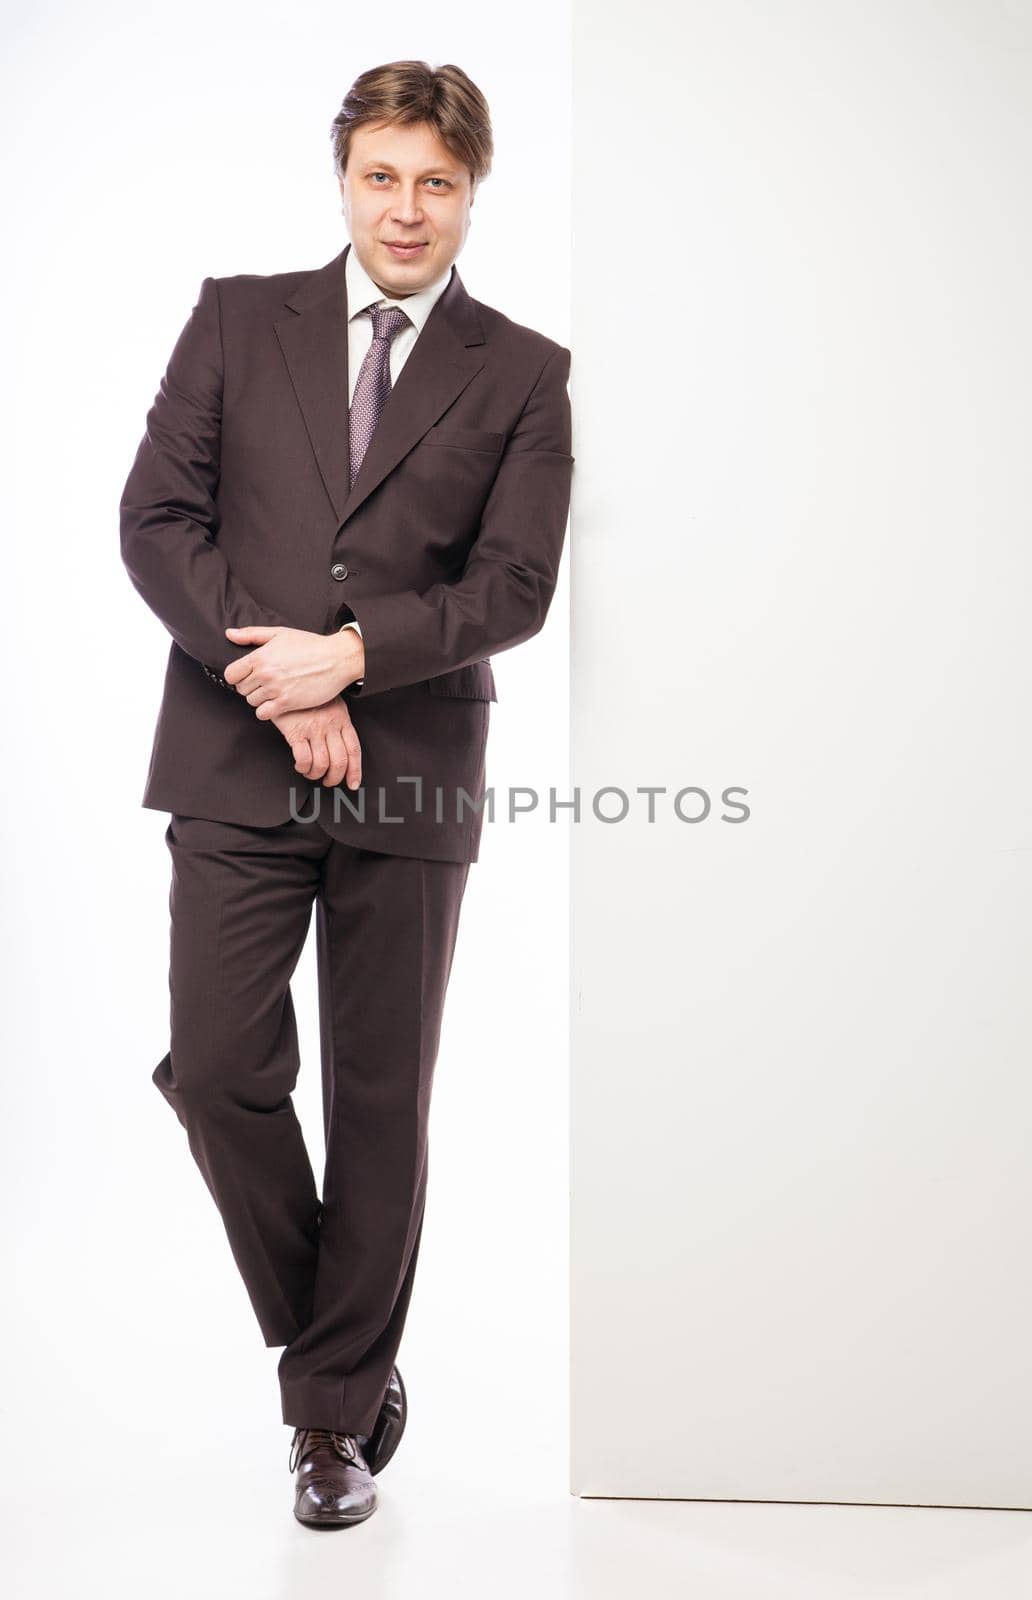 Man leaning against empty board while smiling to camera on white background